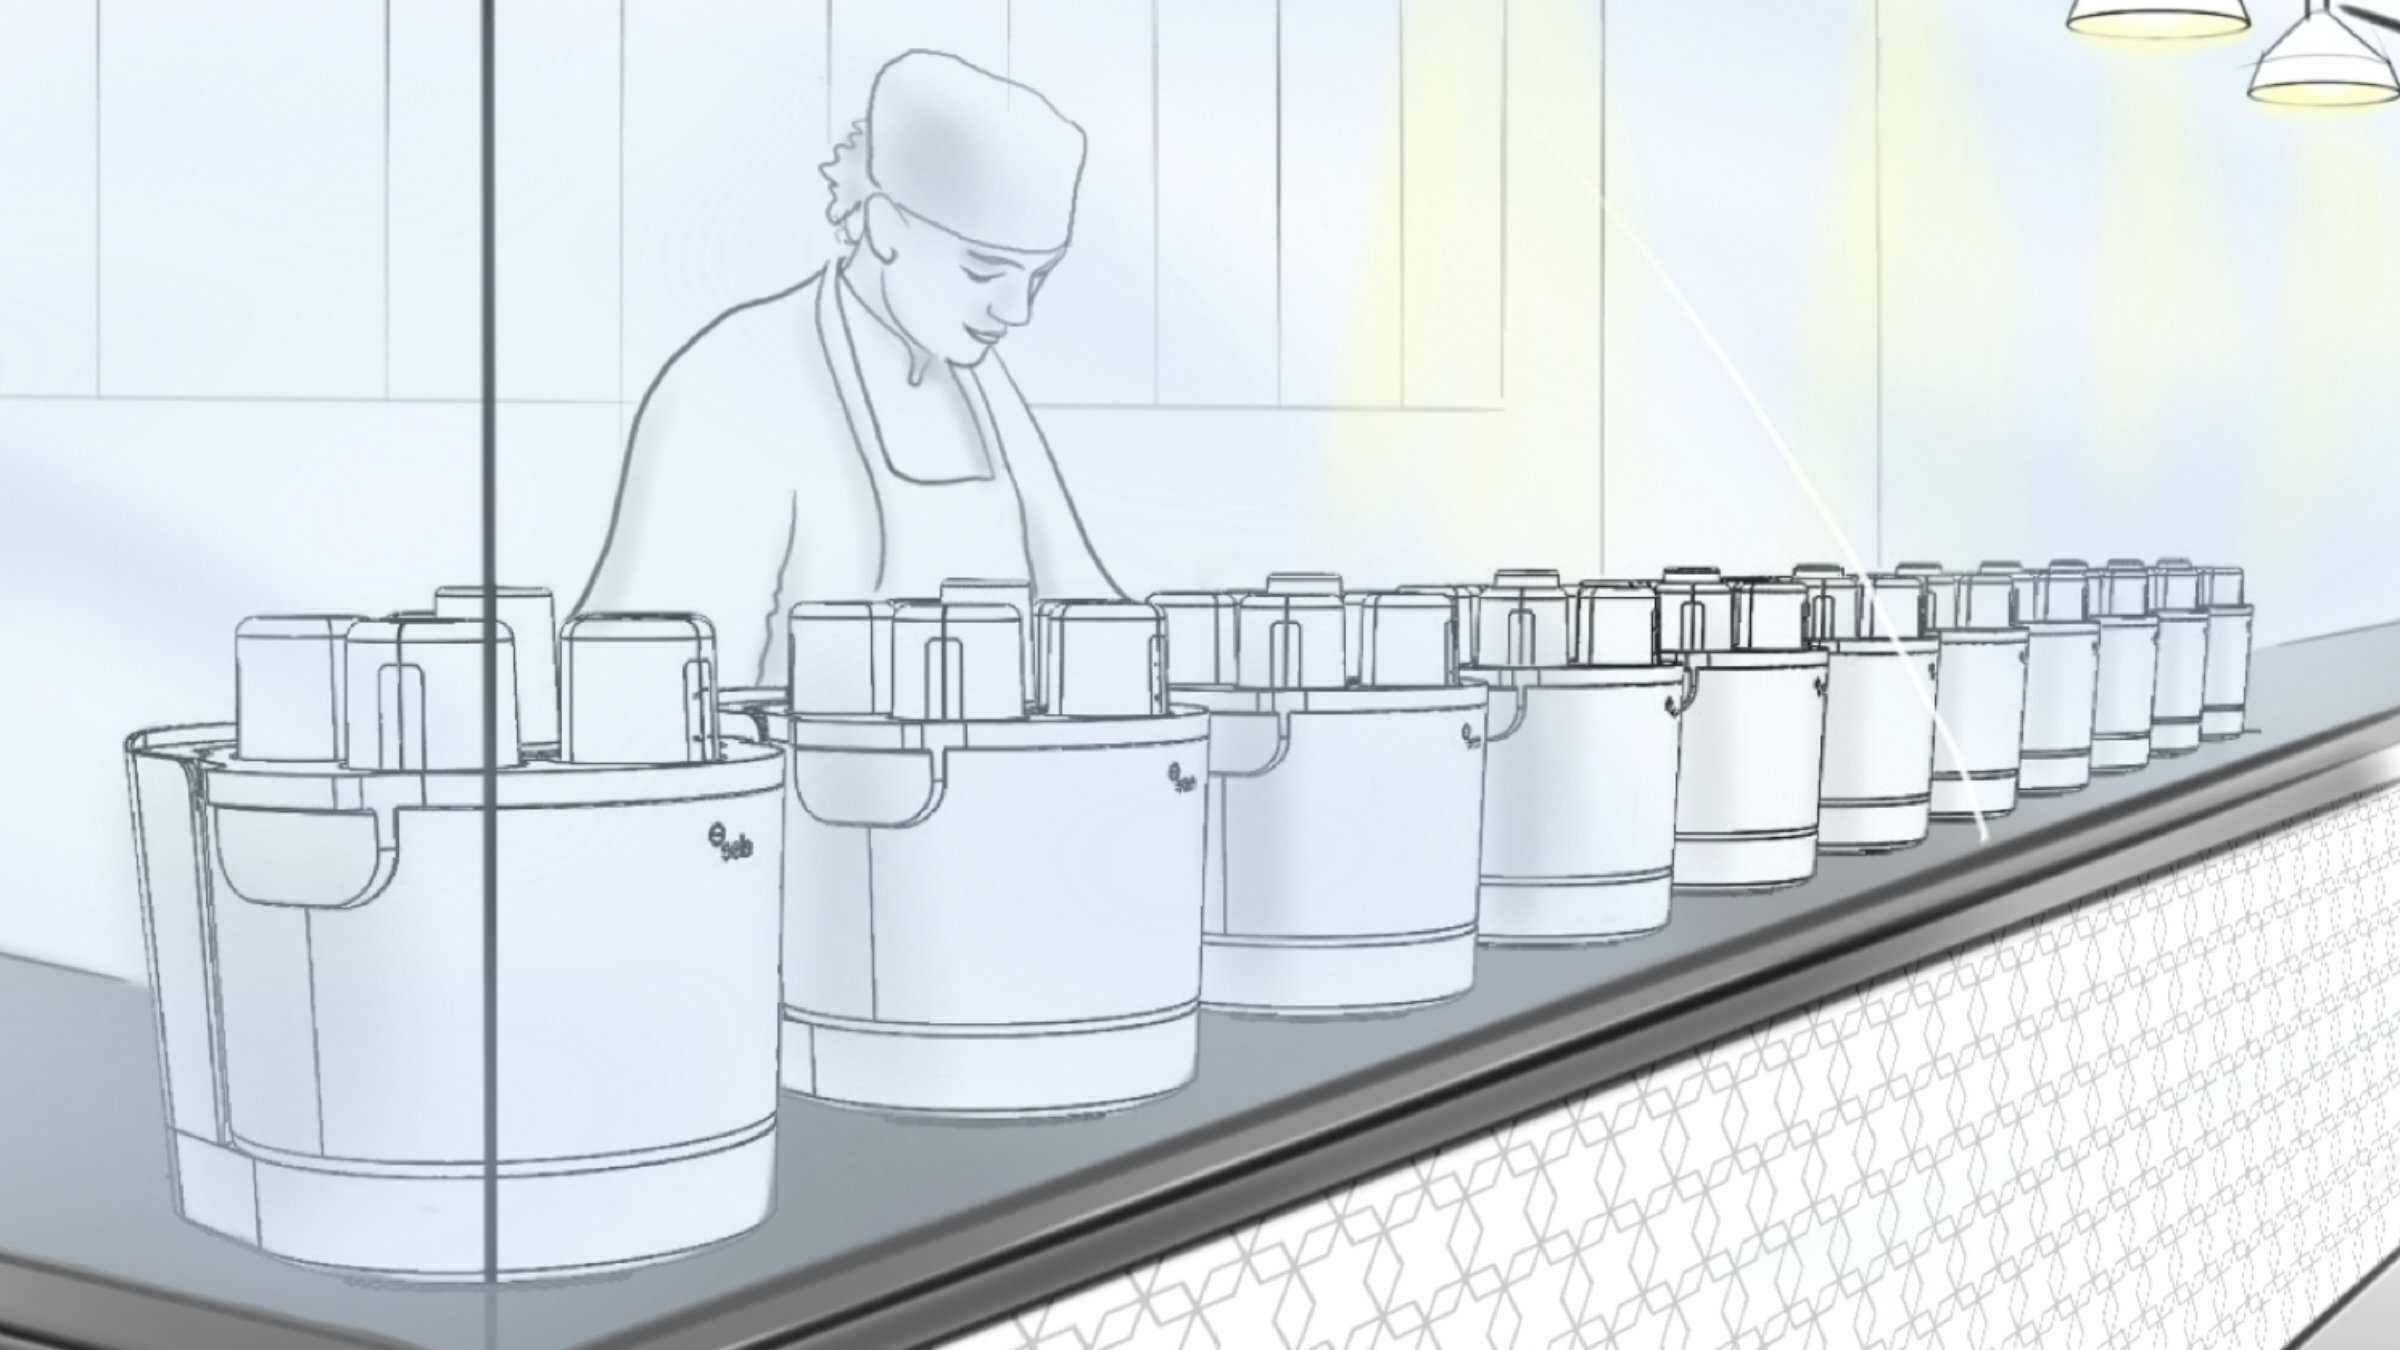 Illustration of a fleet of Oliver's  (11 Olivers lined up) behind a glass wall, with a chef prepping ingredients. This image is a visual representation of a potential restaurant or cloud kitchen concept for an Oliver restaurant.  